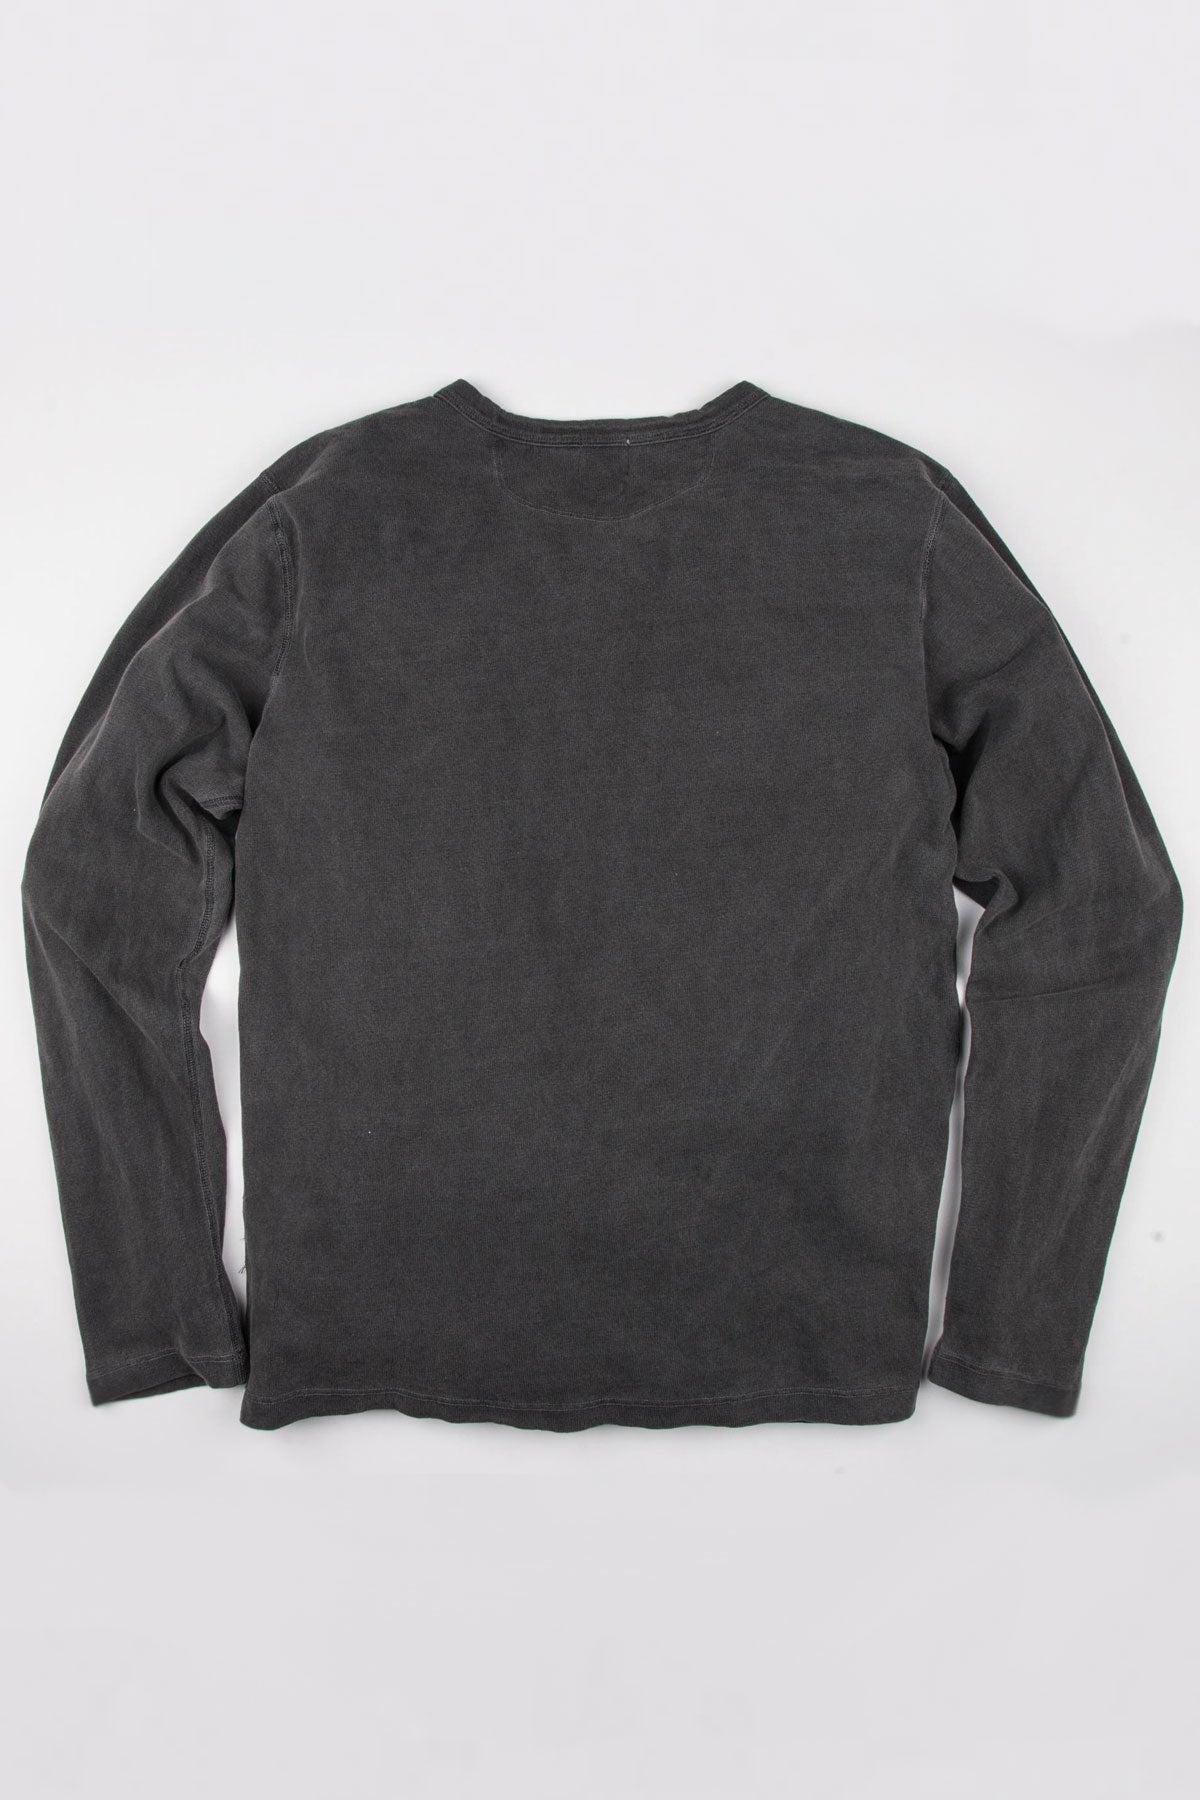 Freenote Cloth - 13 Ounce Henley - L/S Midnight